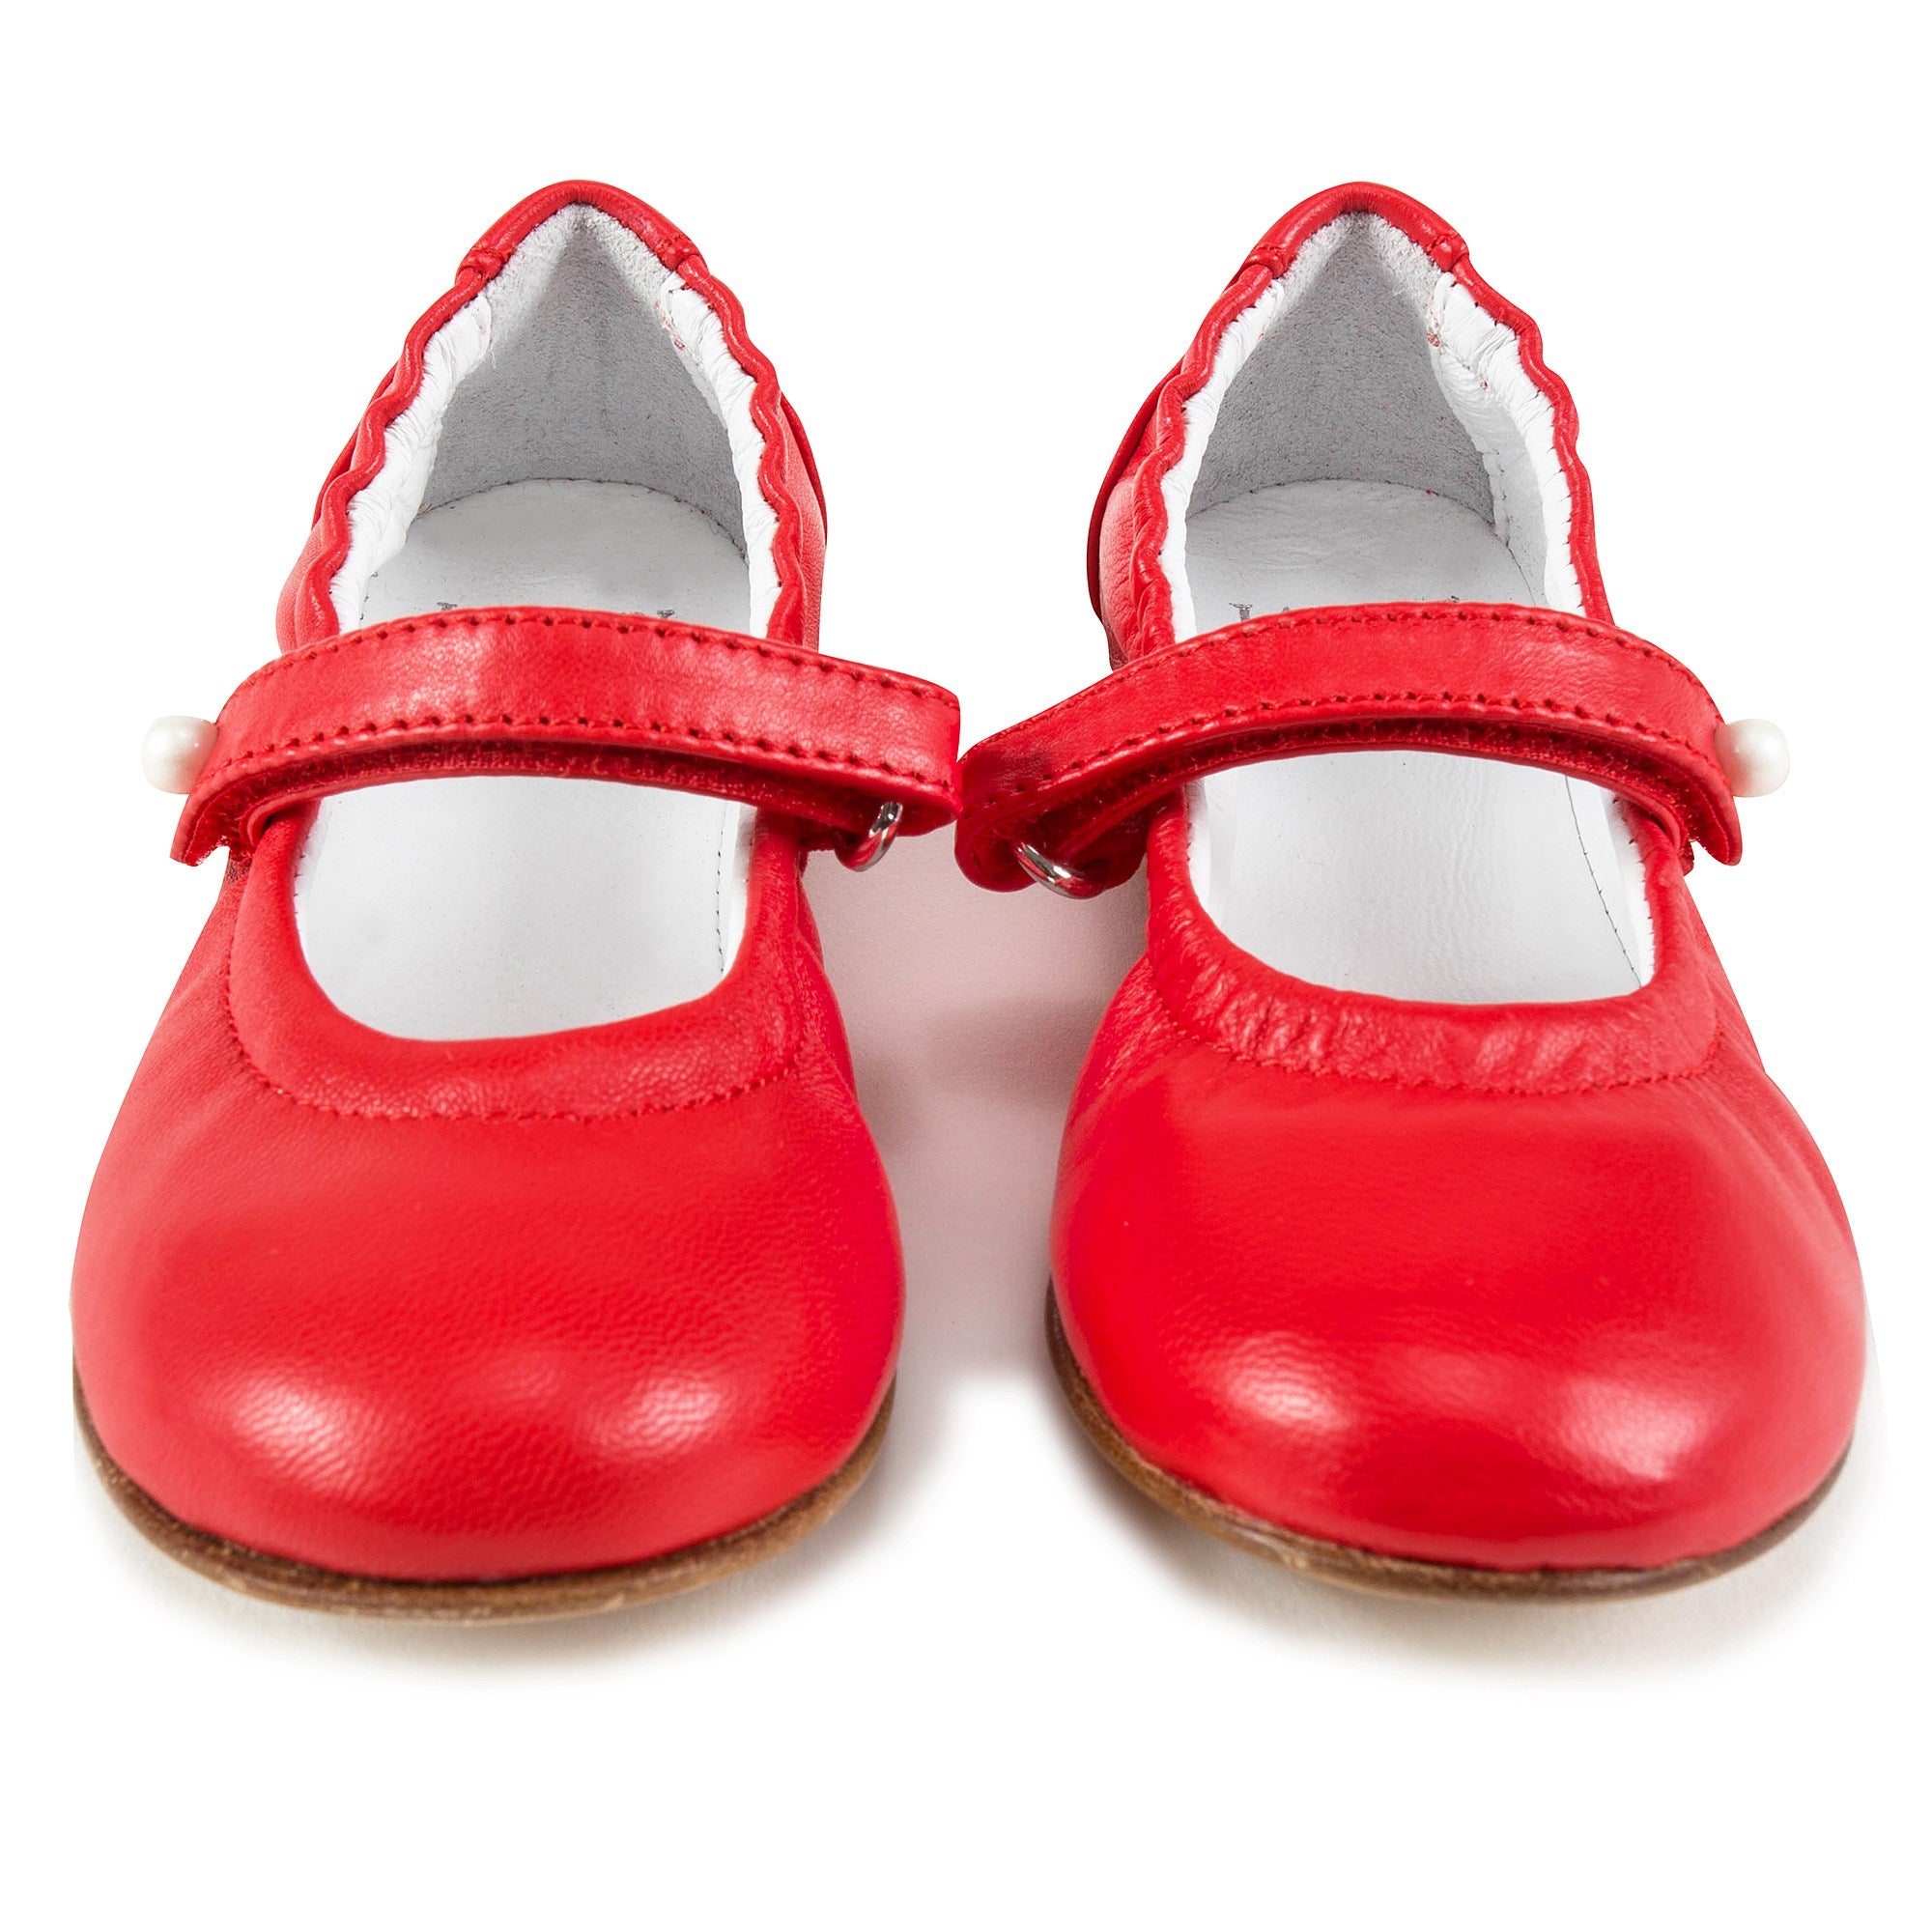 Girls Red Shoes